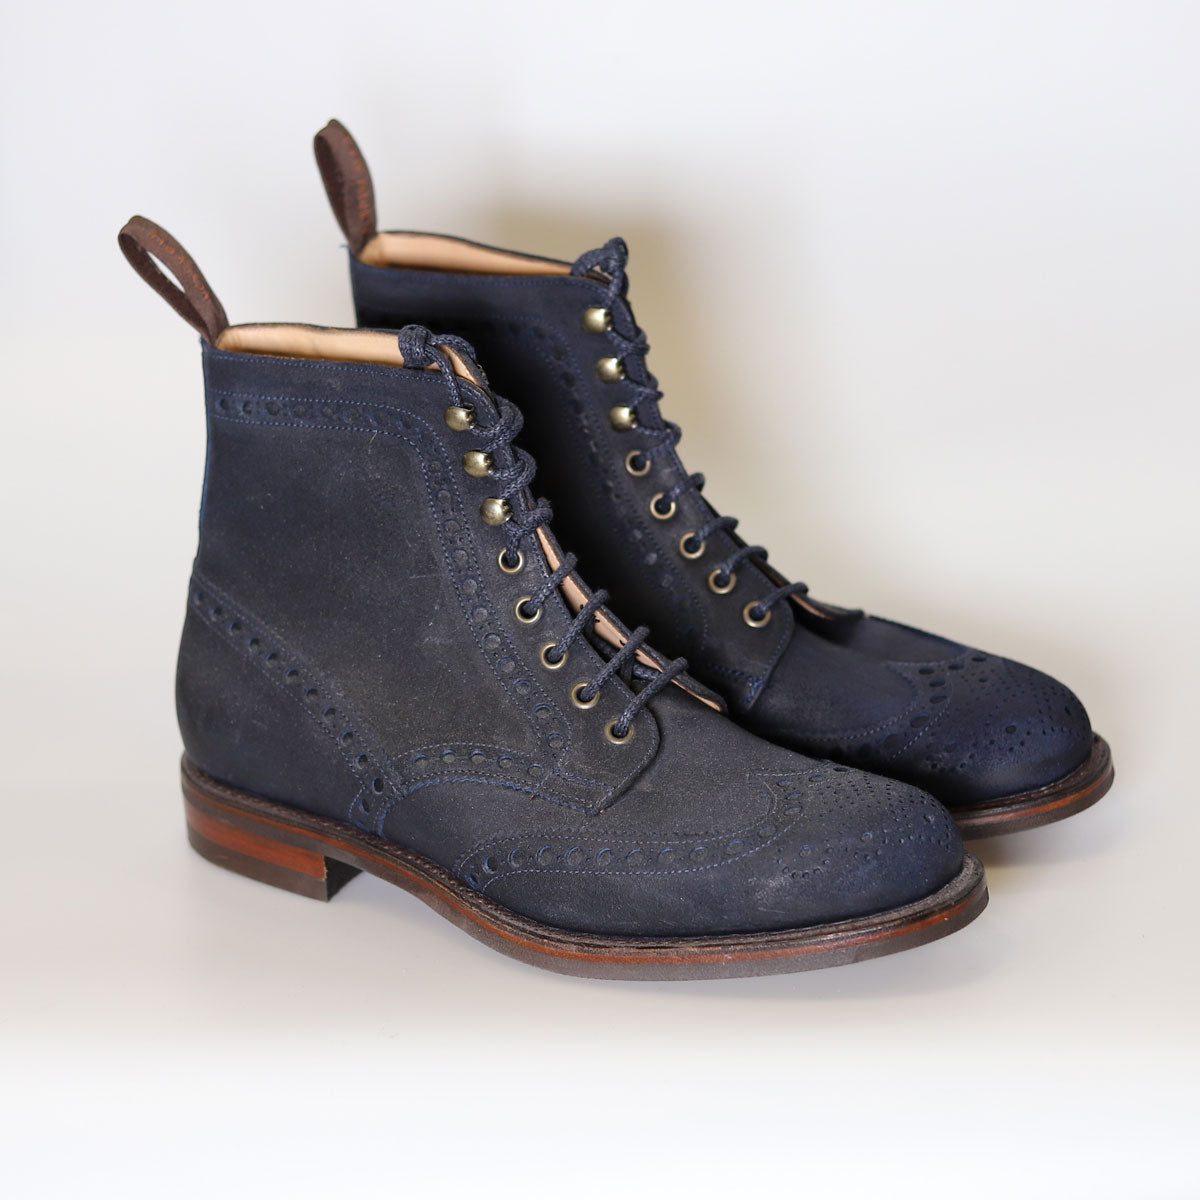 Lough Erne Wingcap Brogue Boot in Blue Split Coupe